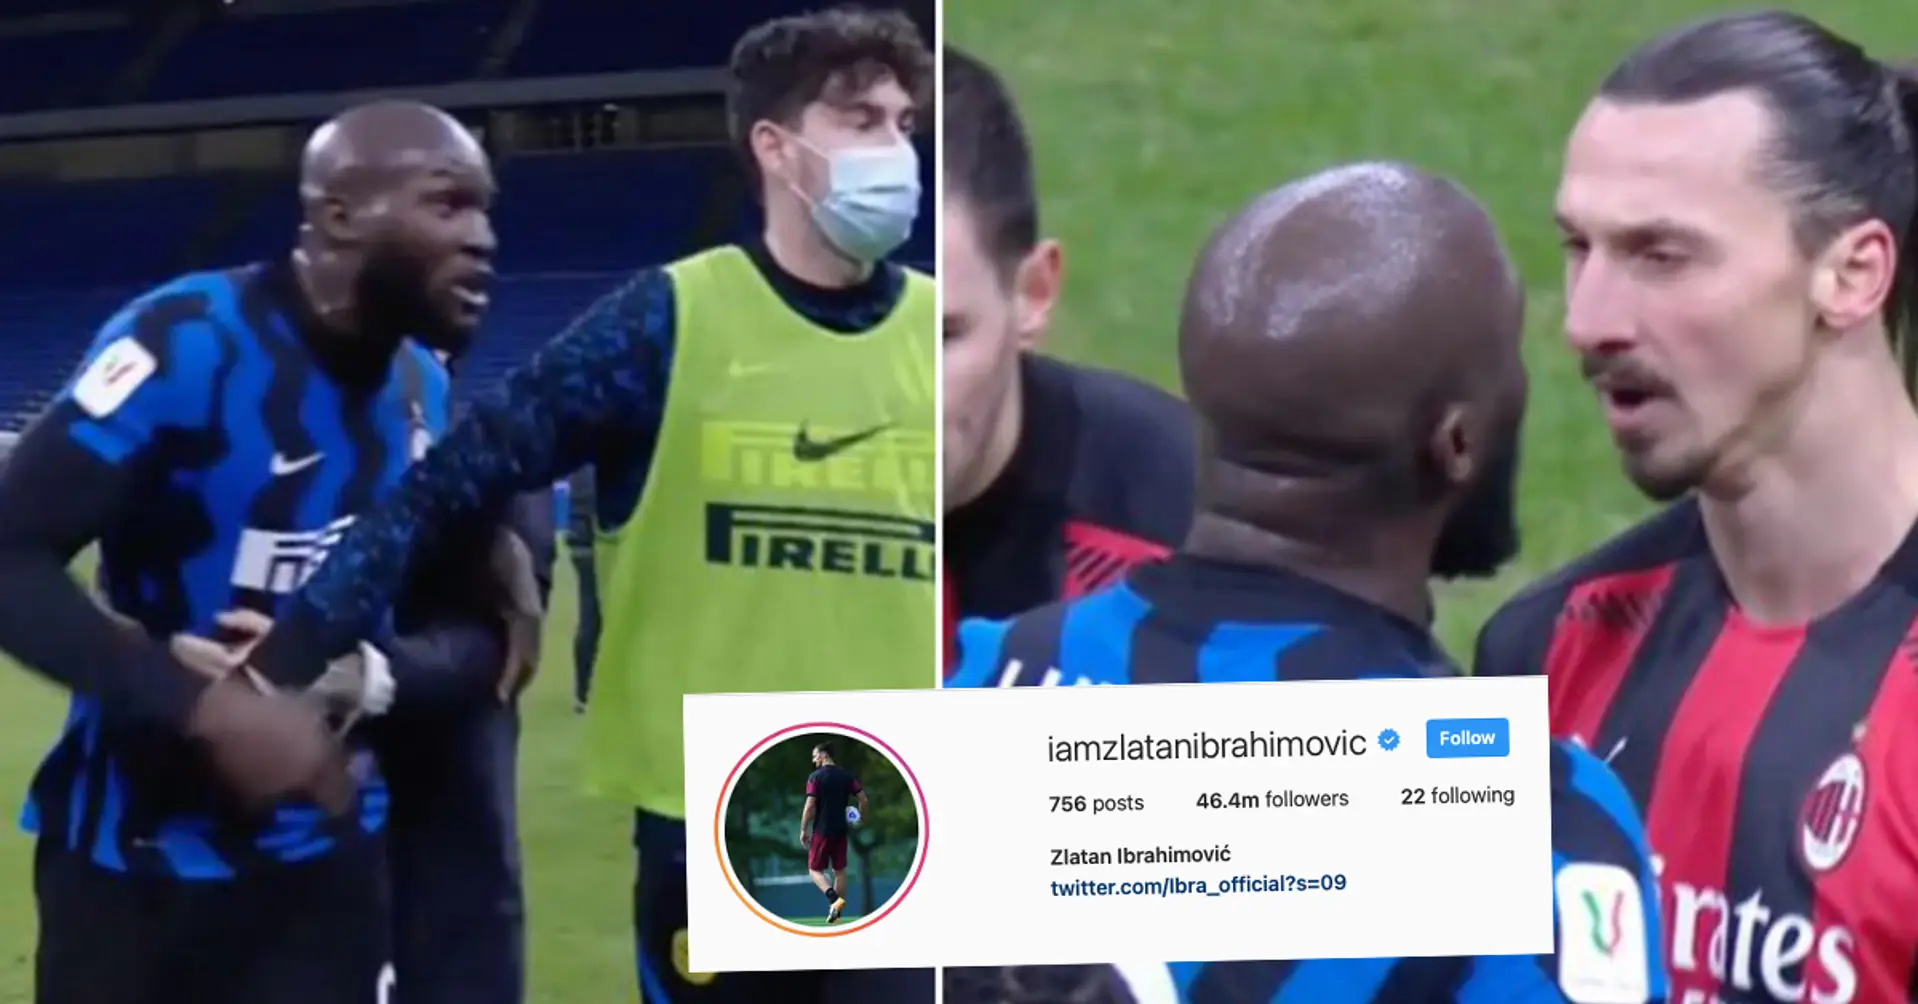 🌍 Global Watch: 'We're all players - some better than others'. Zlatan responds to claims of racism after his clash with Lukaku